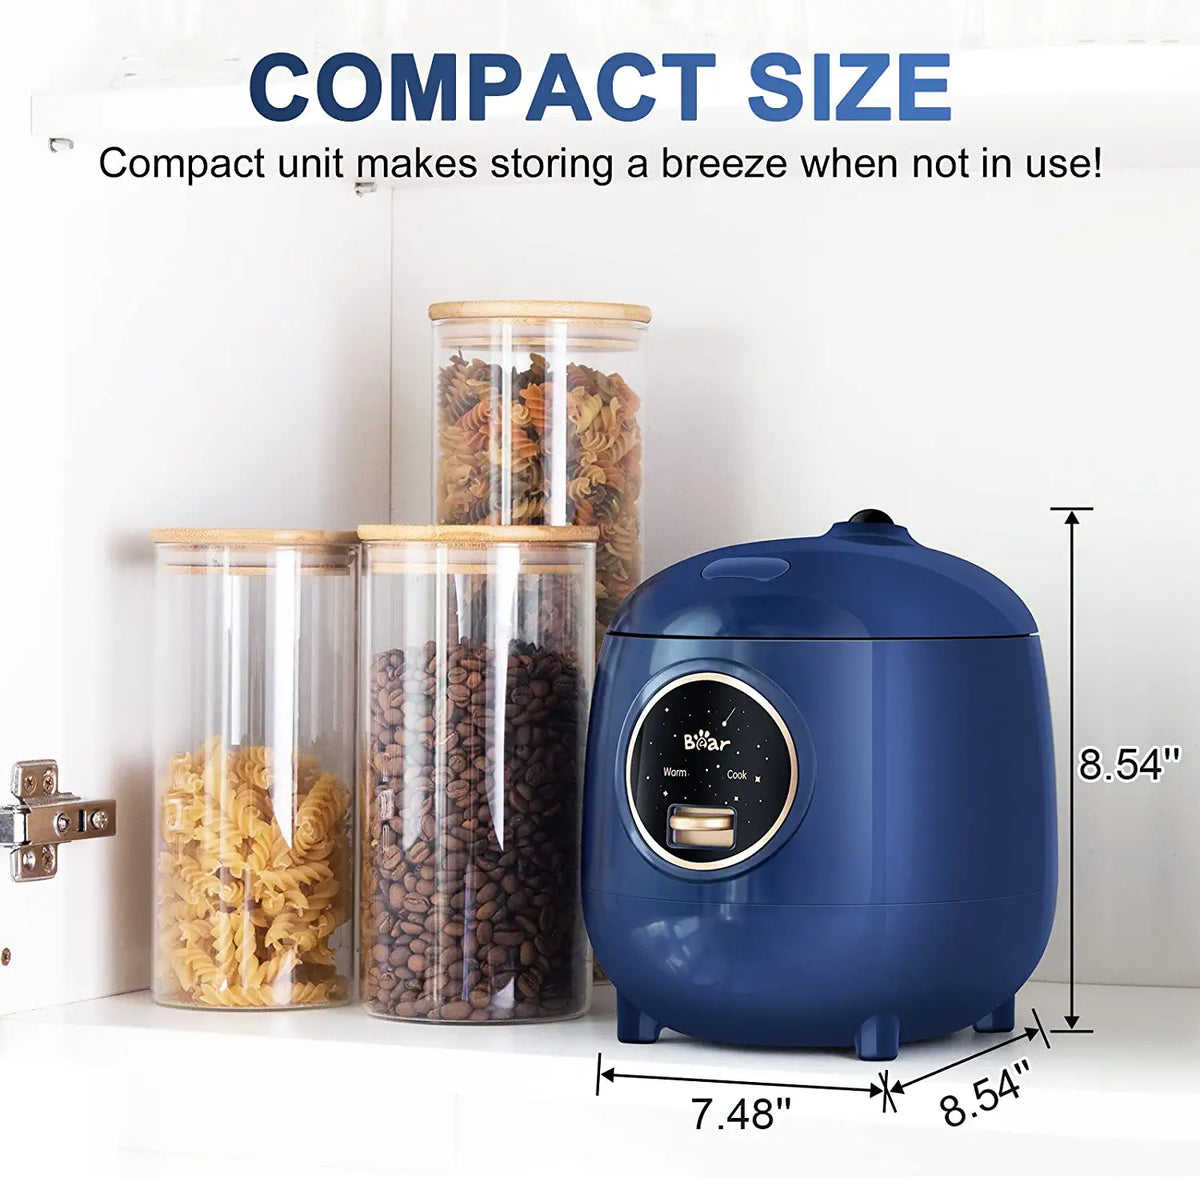 Bear Smart IH Rice Cooker Rice Cooker DFB-P20F1 Firewood Yuan Kettle  Refined Iron Liner IH Stereo Heating 2L 